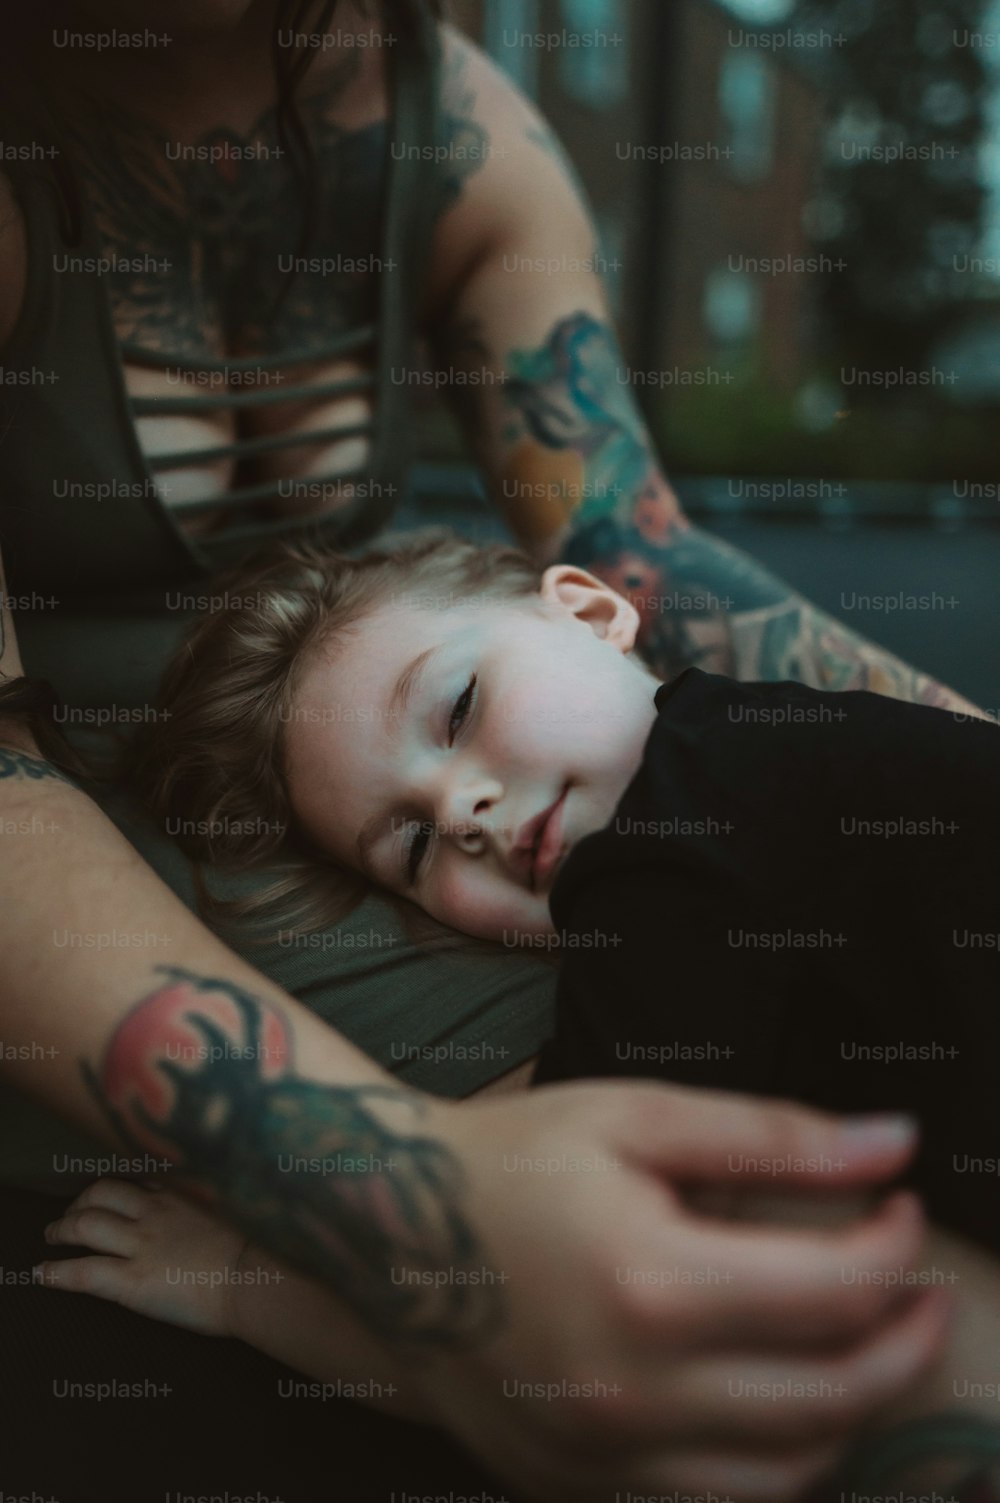 a woman with tattoos on her arm holding a child